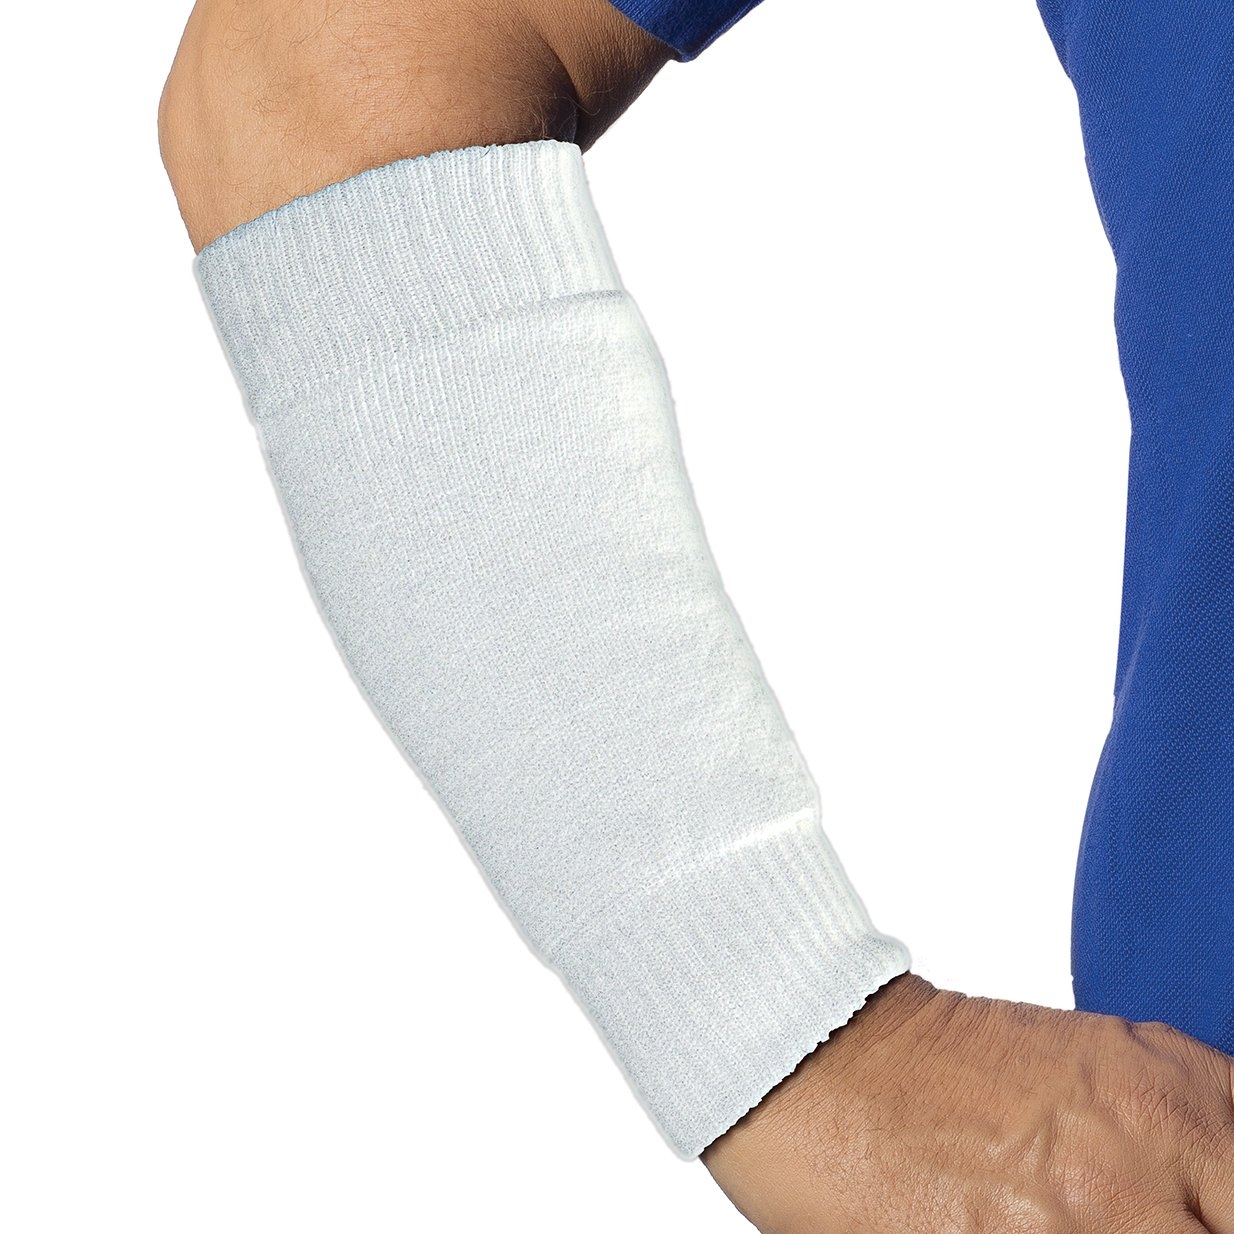 Forearm protectors for thin skin – Light Weight – Protect Frail Skin White – Limb Keepers